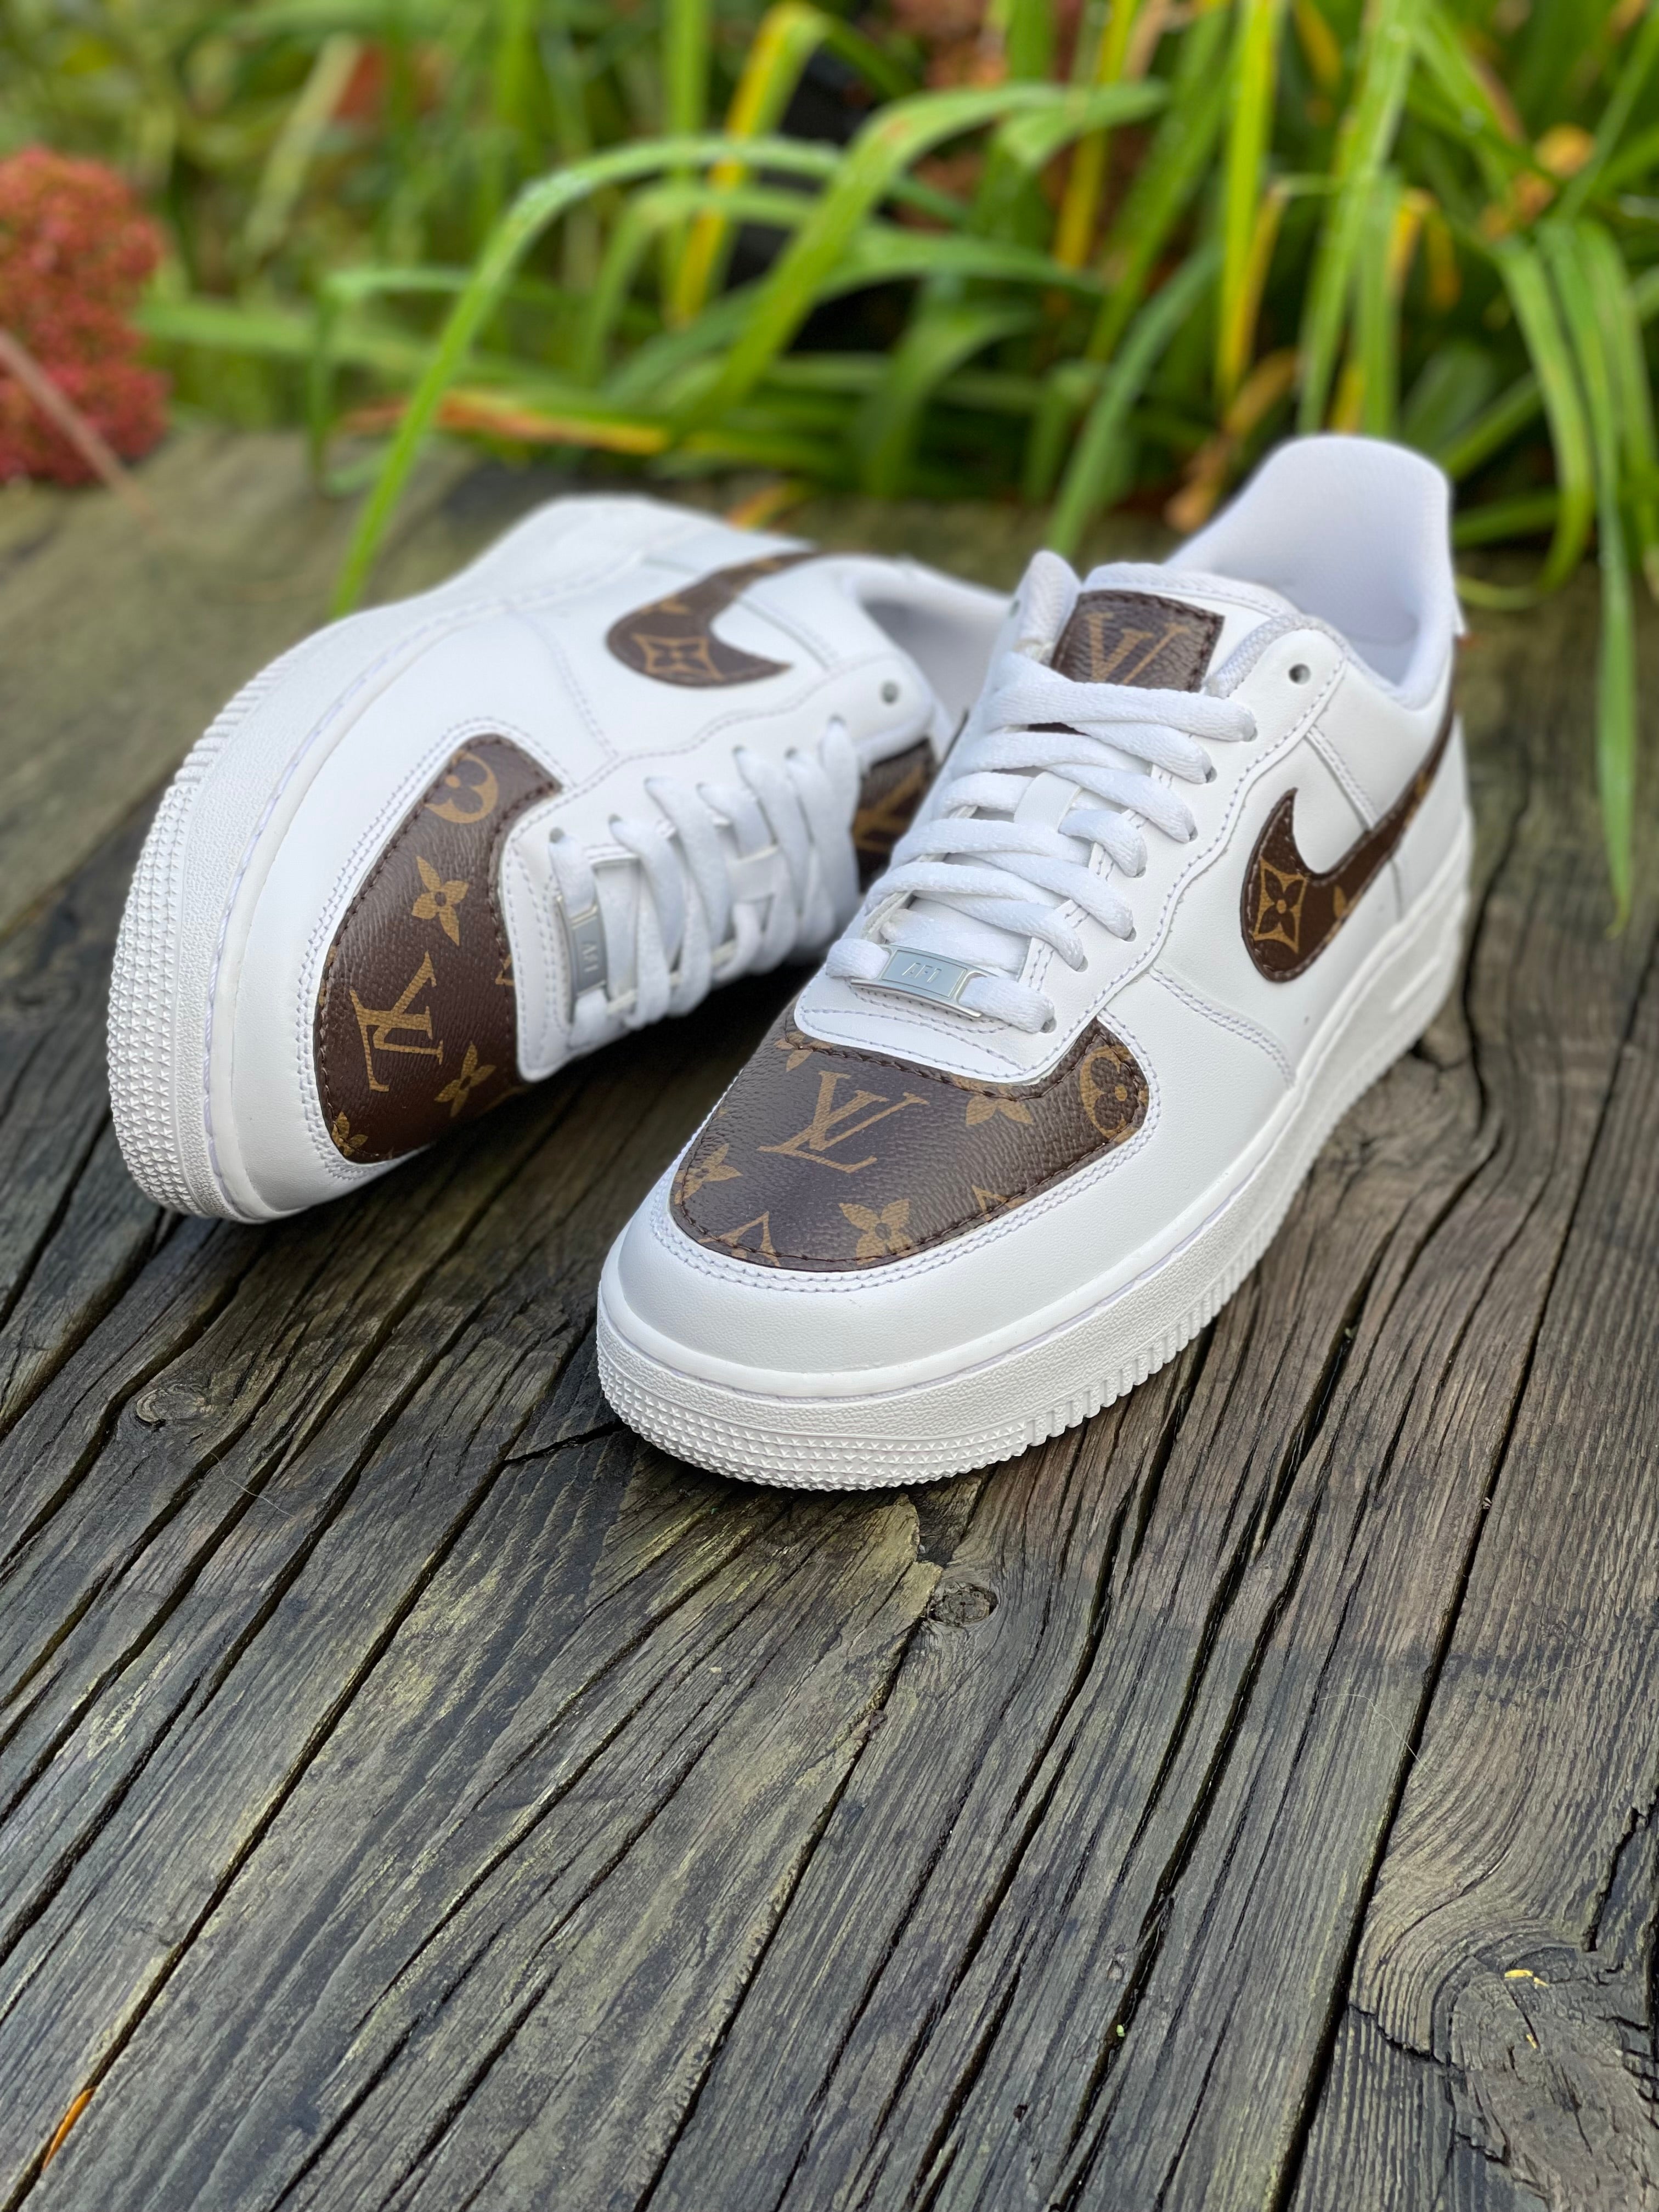 JT Customshoes - Nike AF1 x Louis Vuitton⁣⁣ ⁣⁣ Done for